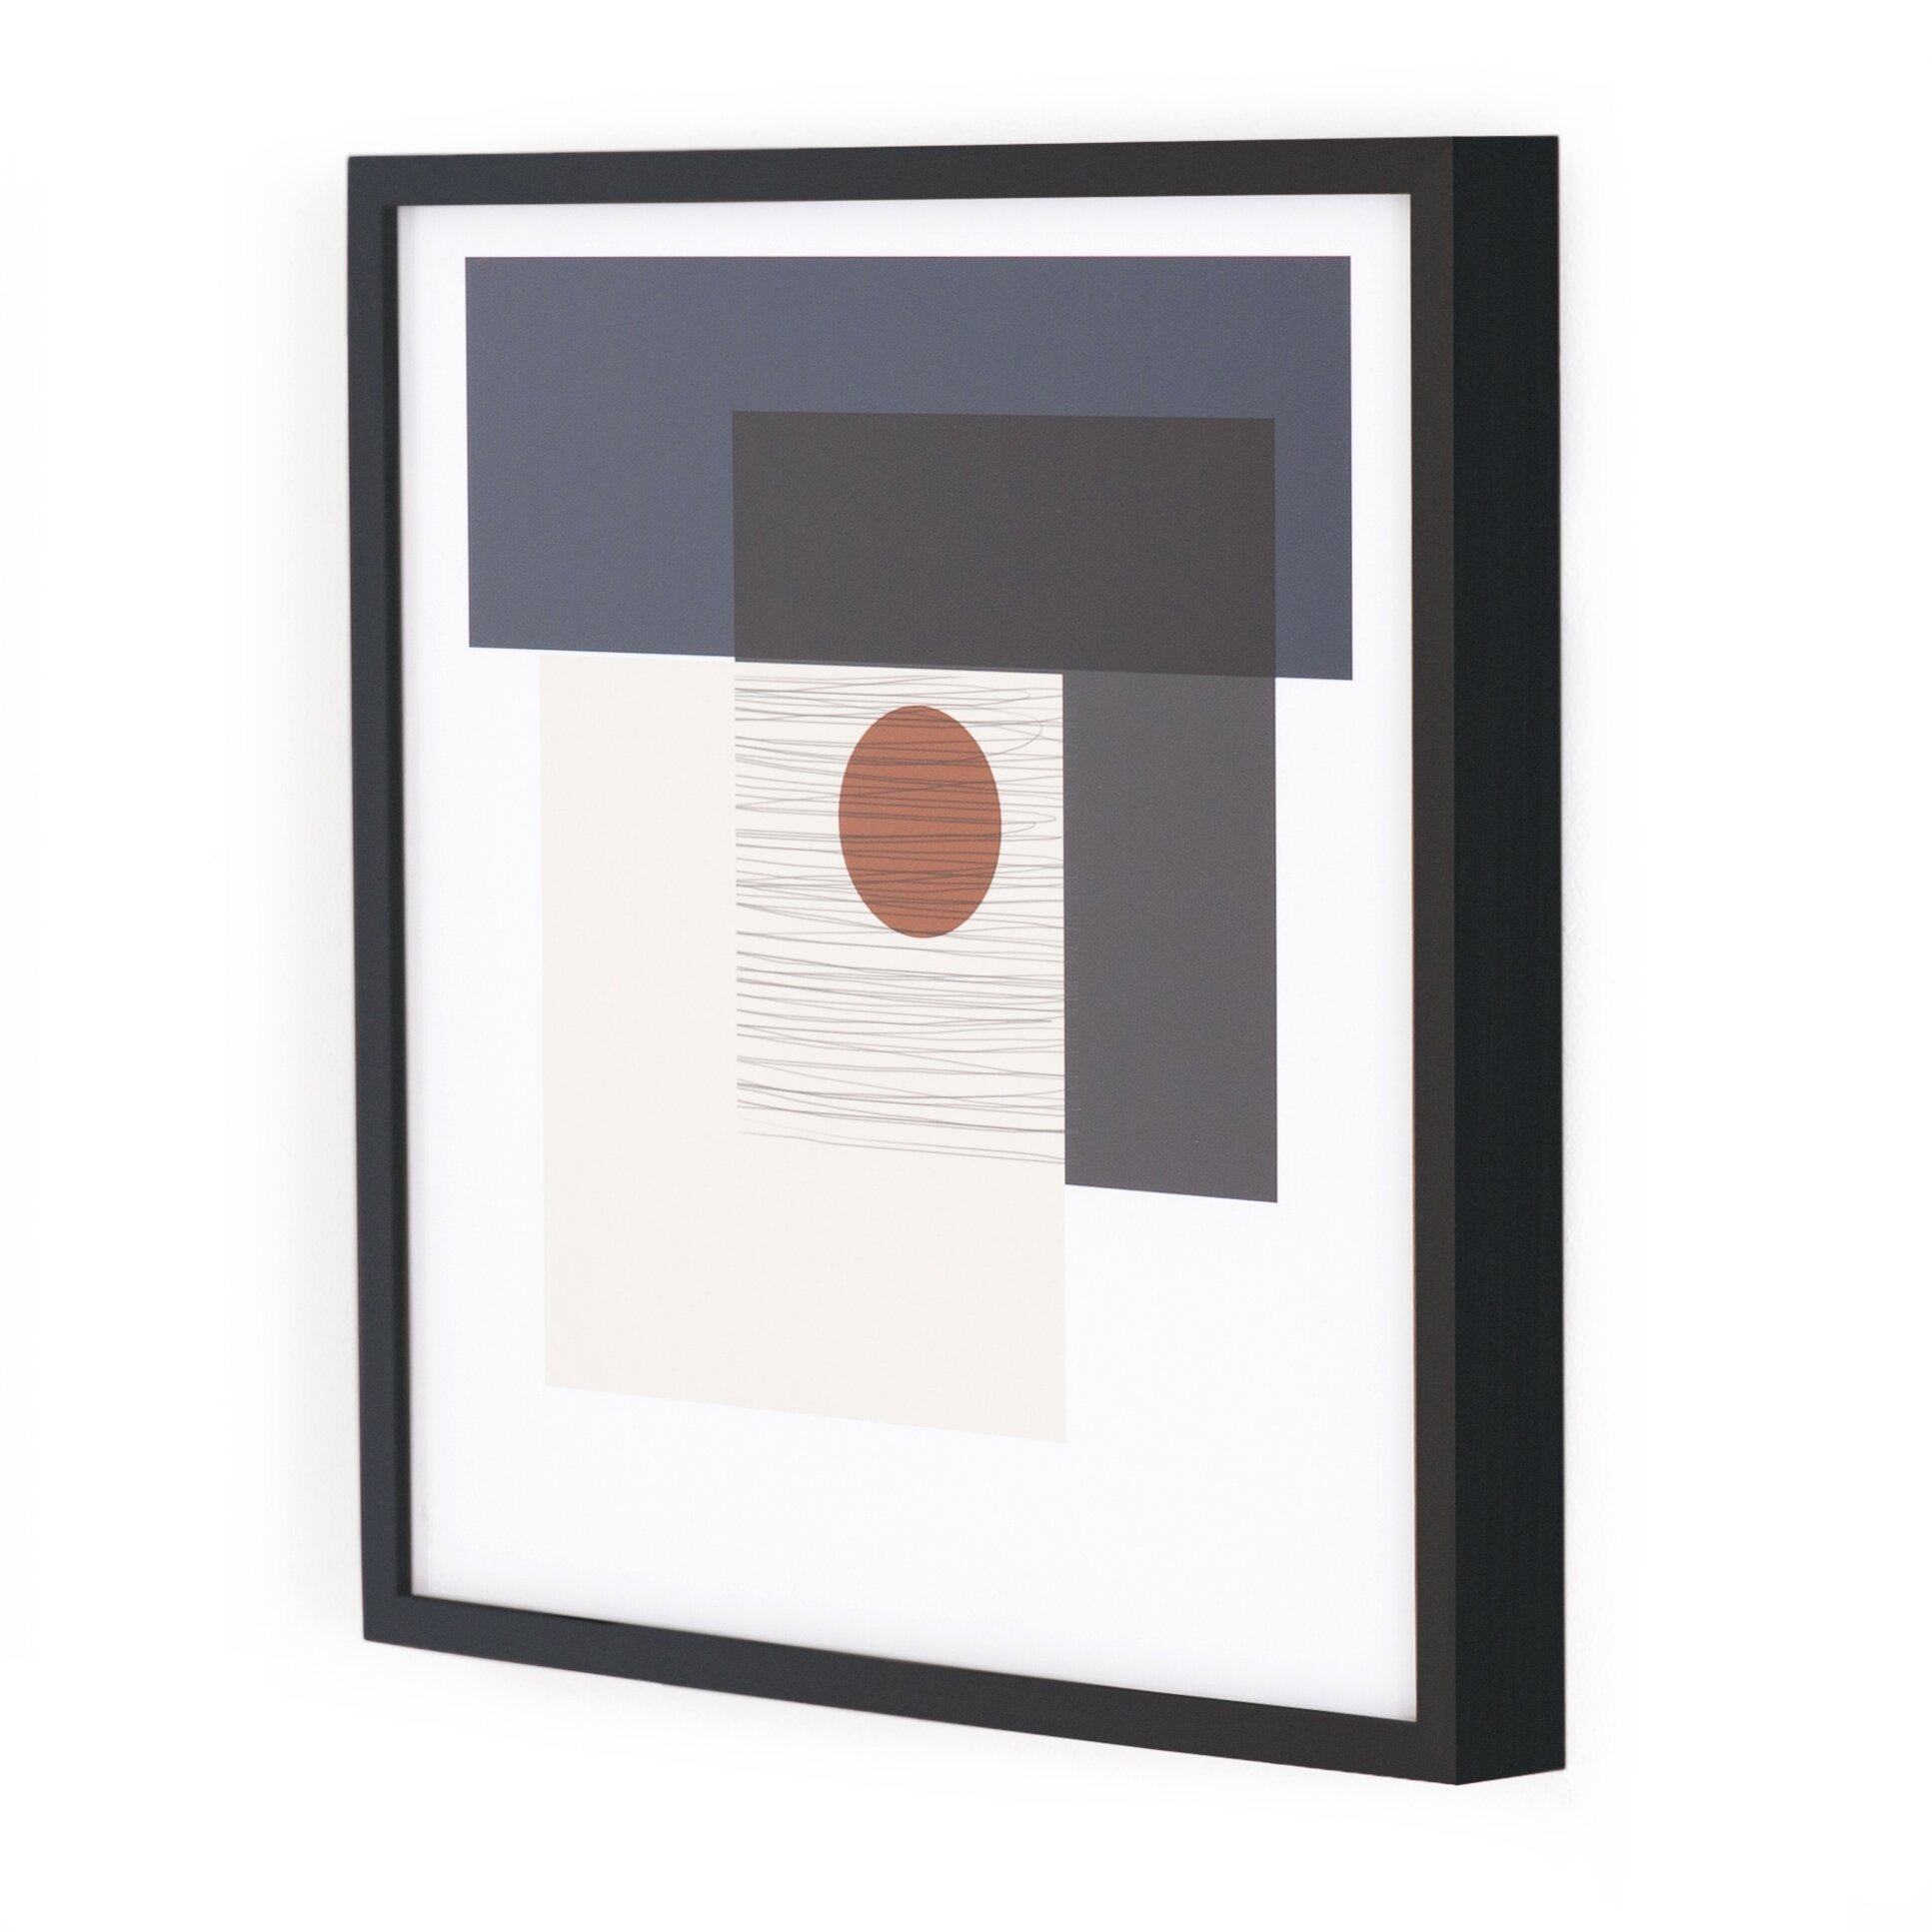 Four Hands Art Studio Jess Engle Mantle by Jess Engle - Picture Frame ...